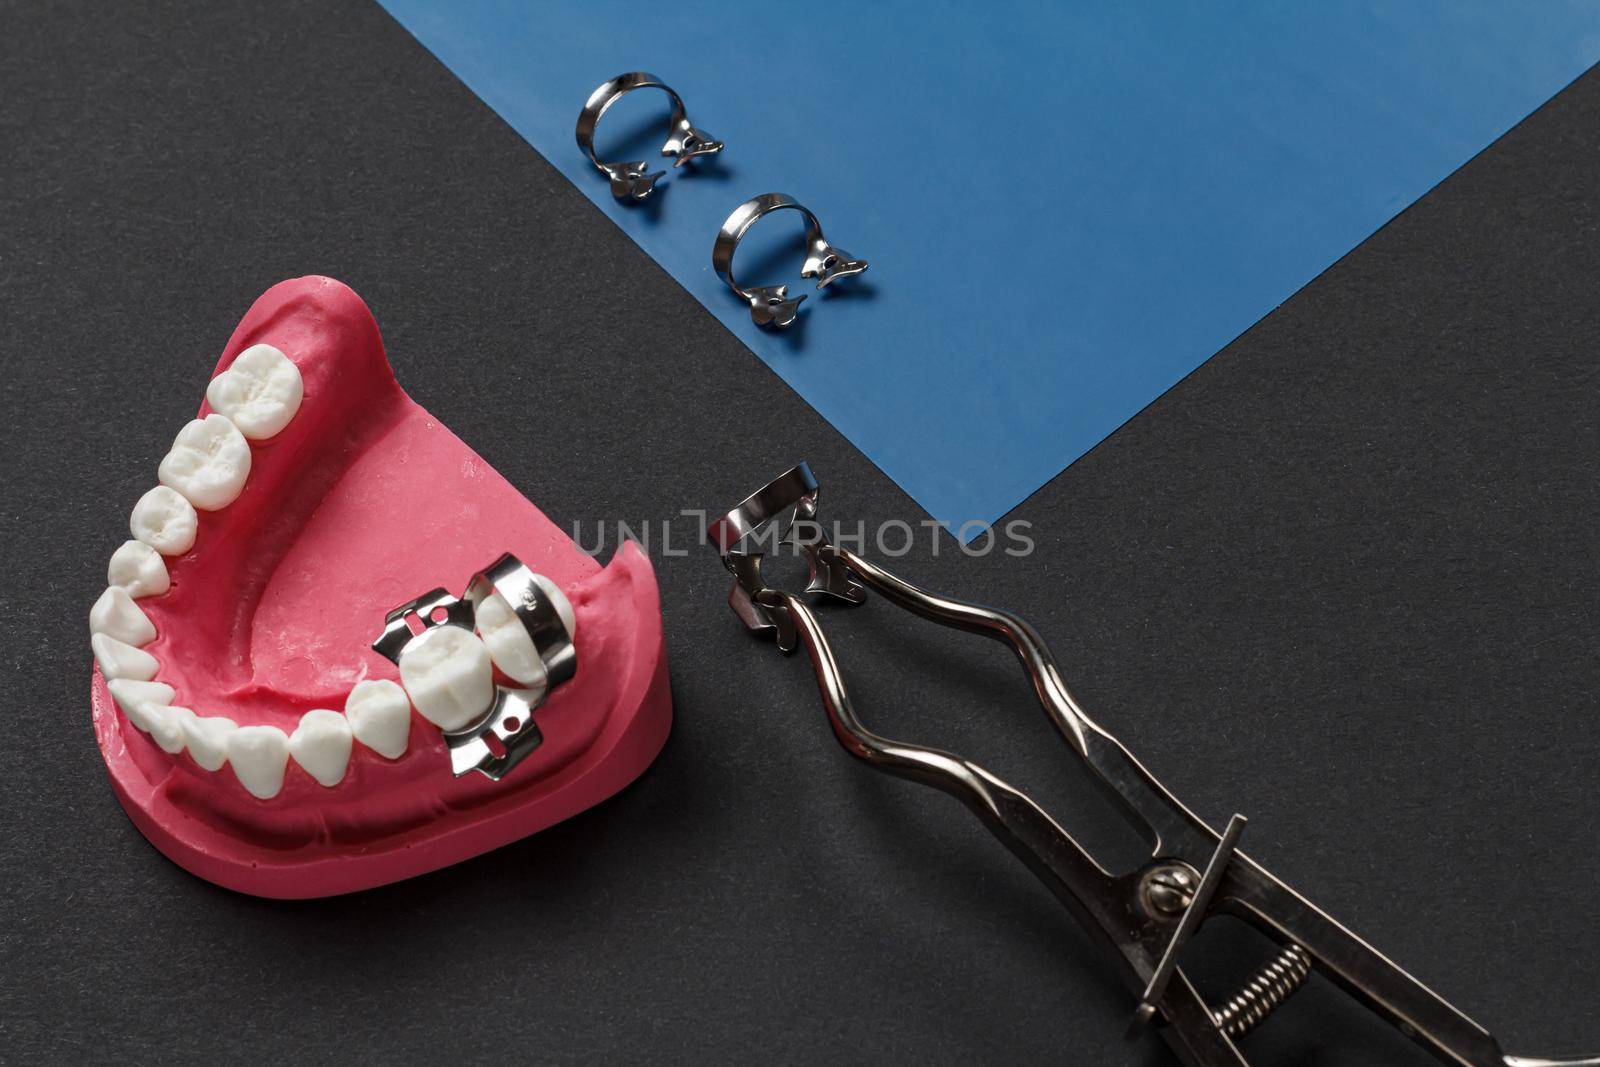 Layout of the human jaw, a rubber dam with dental dam clamps and a rubber dam clamp pliers on the black background. Medical tools concept. Top view.